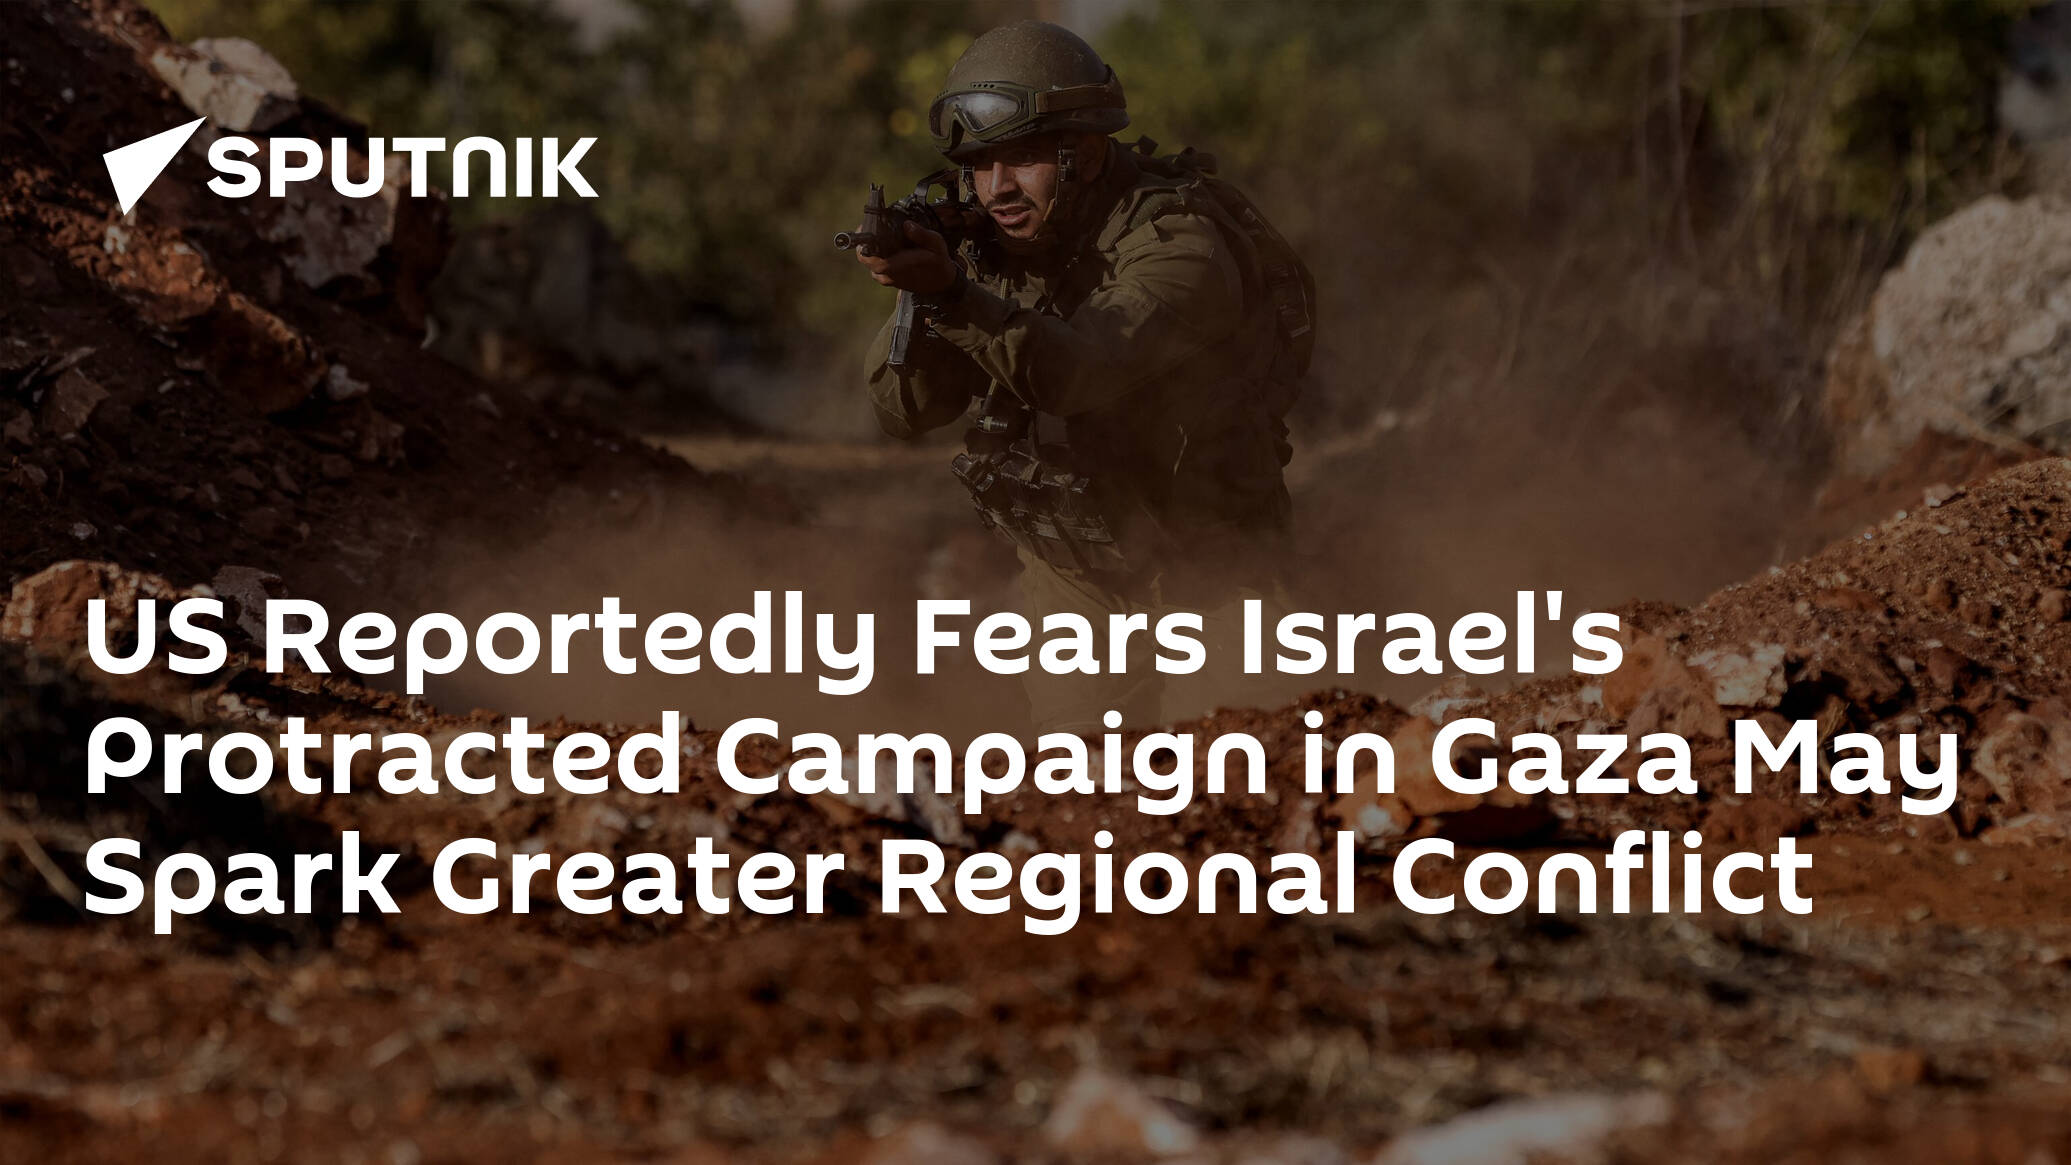 US Reportedly Fears Israel's Protracted Campaign in Gaza May Spark Greater Regional Conflict